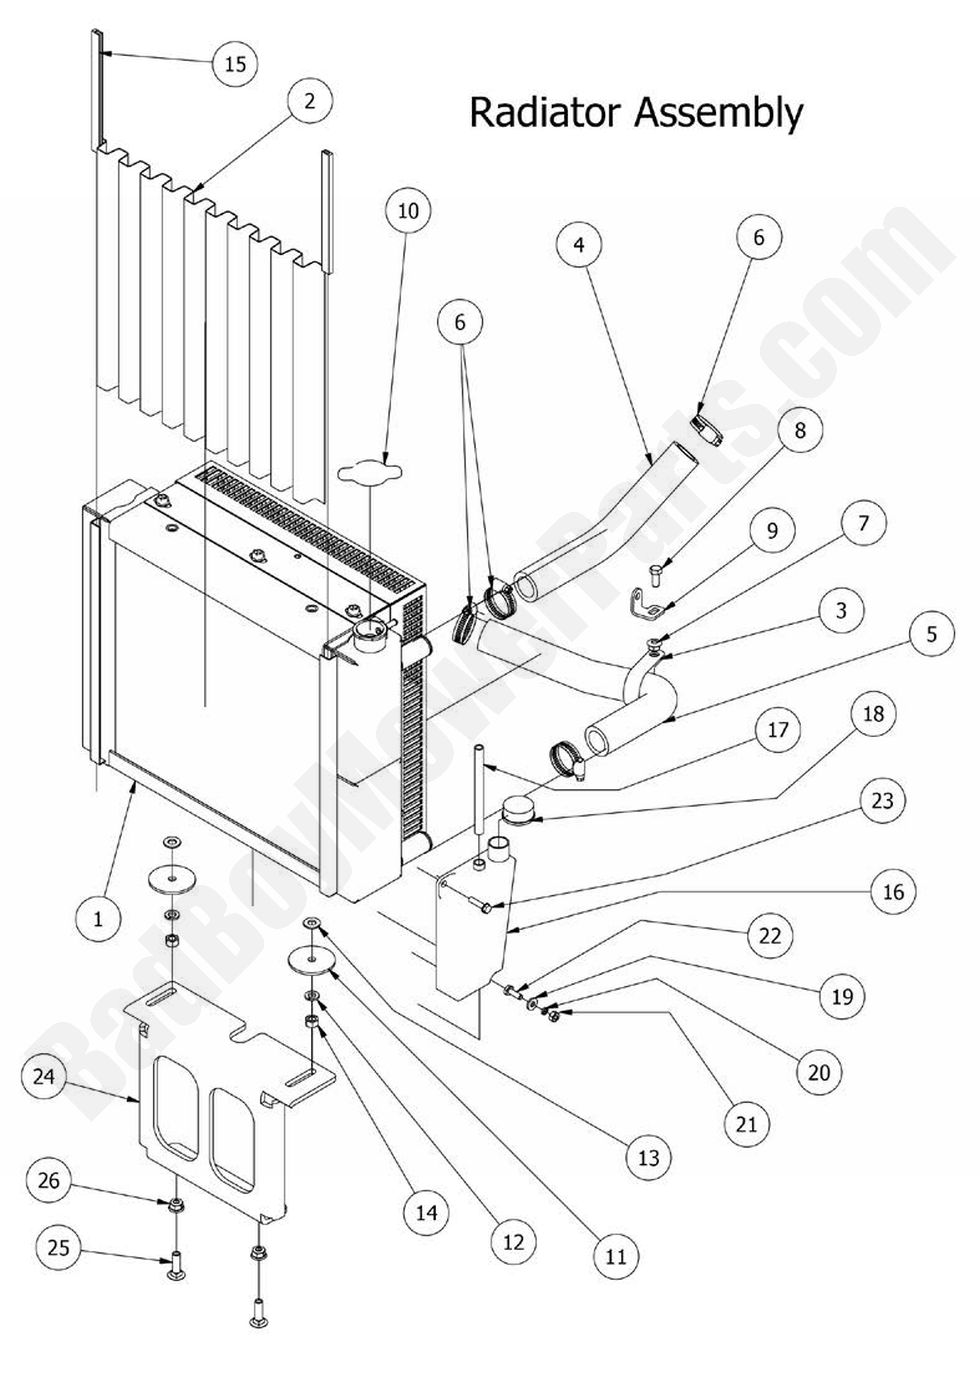 2015 Compact Diesel Radiator Assembly